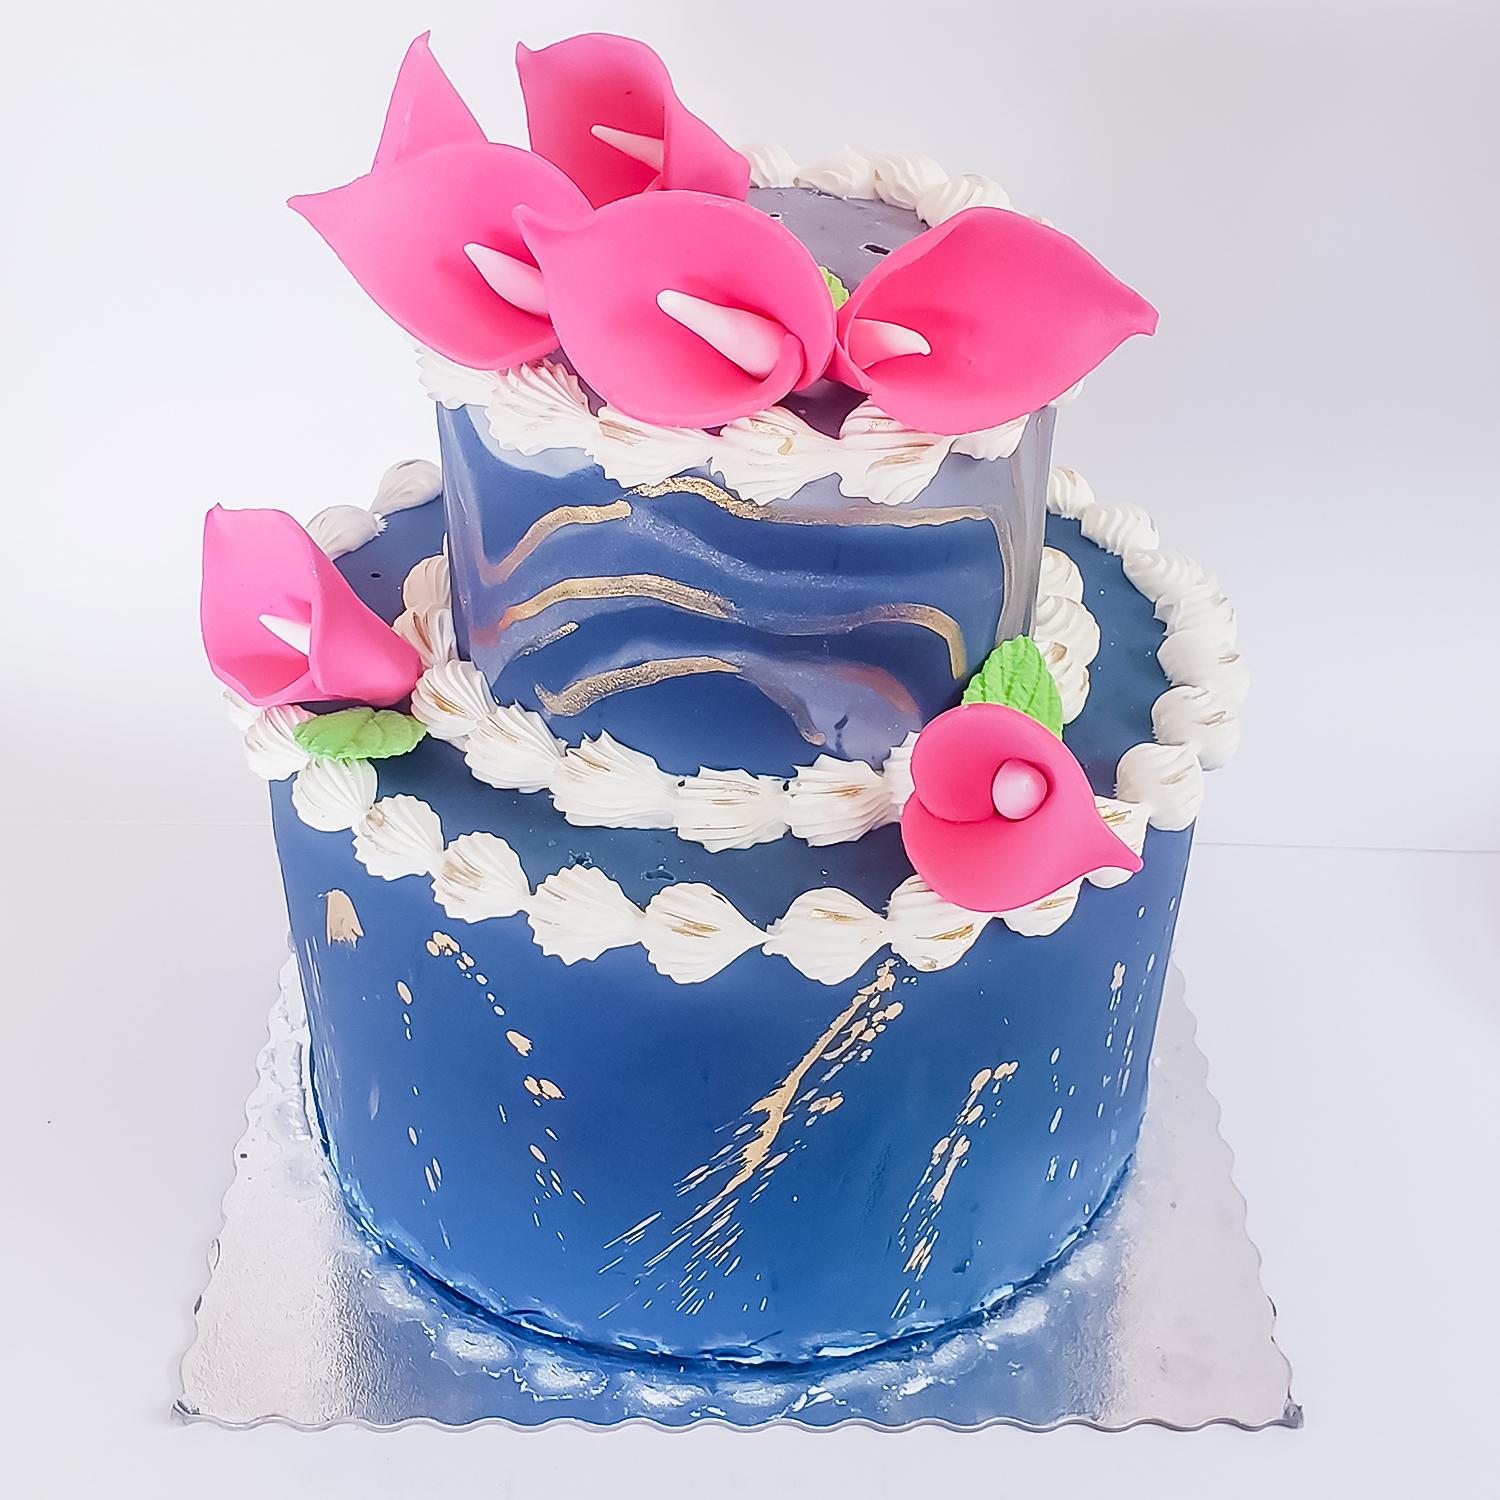 SUPER CAKES LILLIES FLOWERS HOT PINK